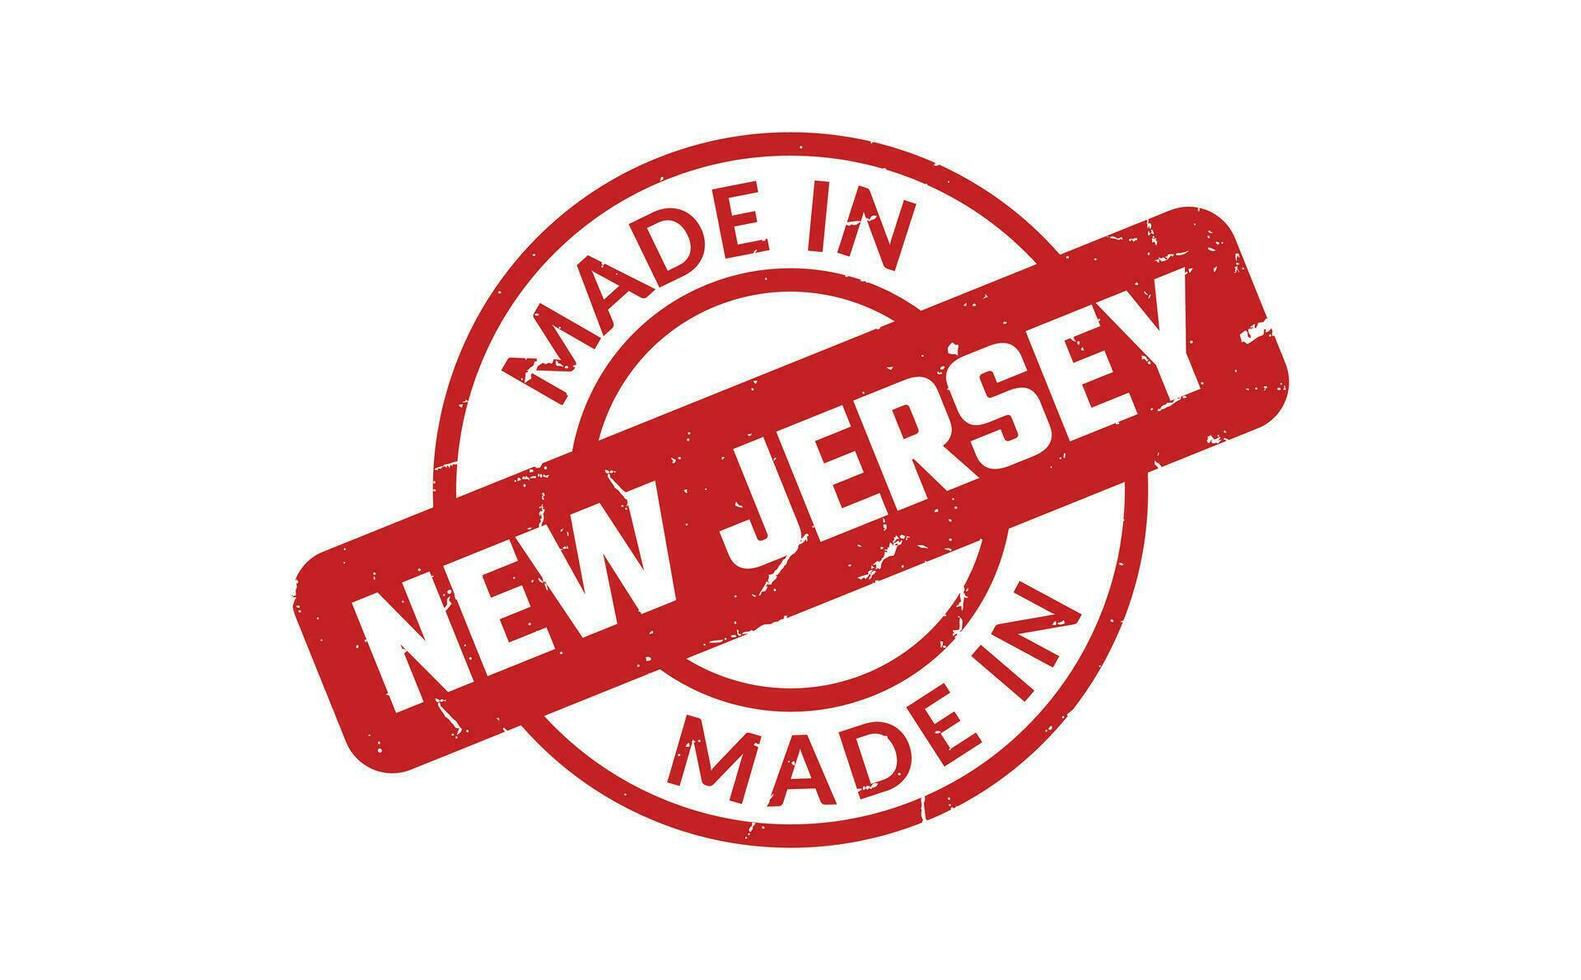 Made In New Jersey Rubber Stamp vector